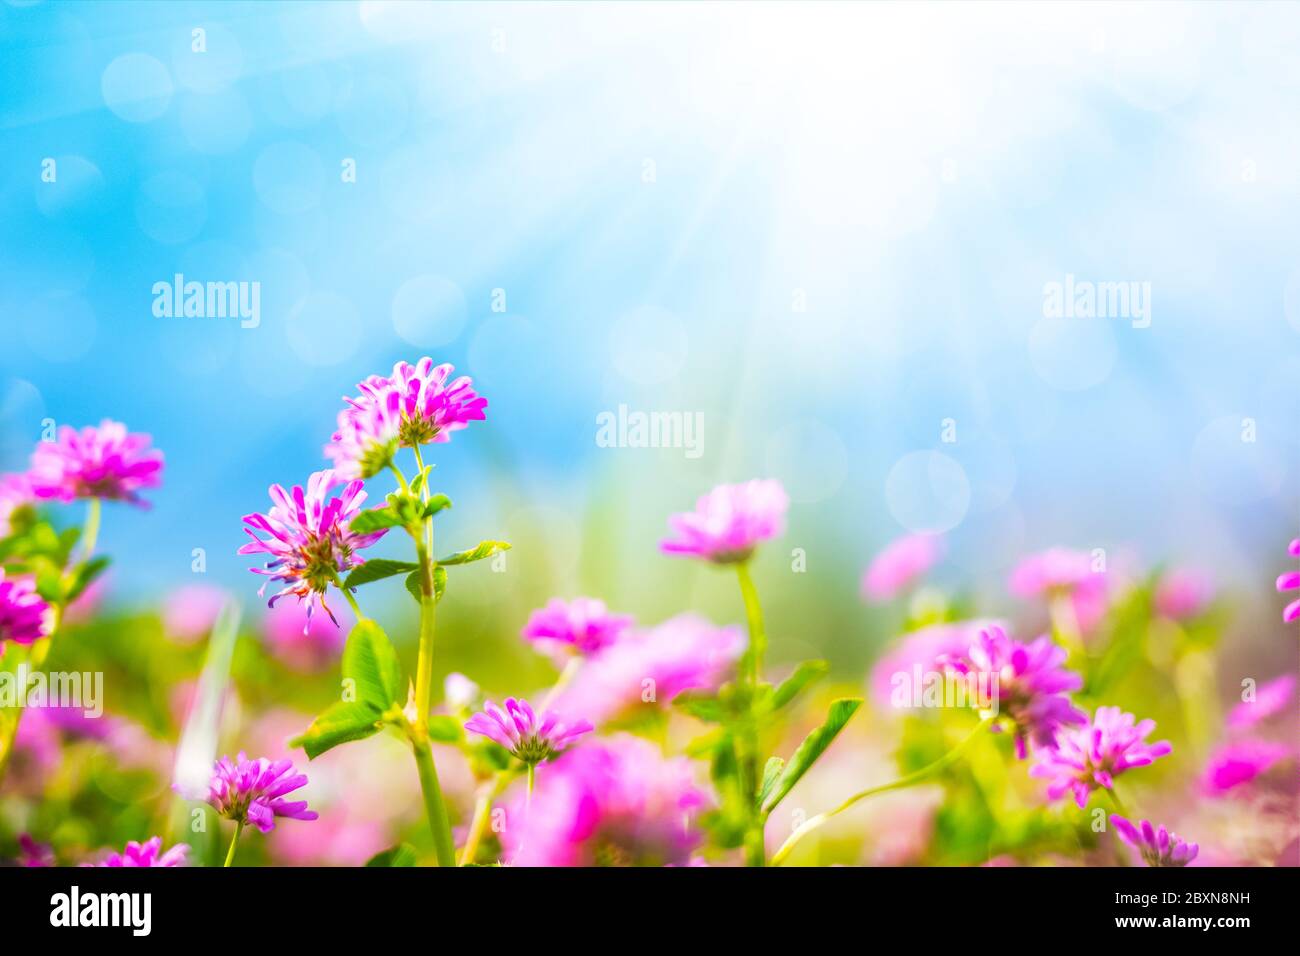 Wildflowers against a blue sky in sunny day Stock Photo